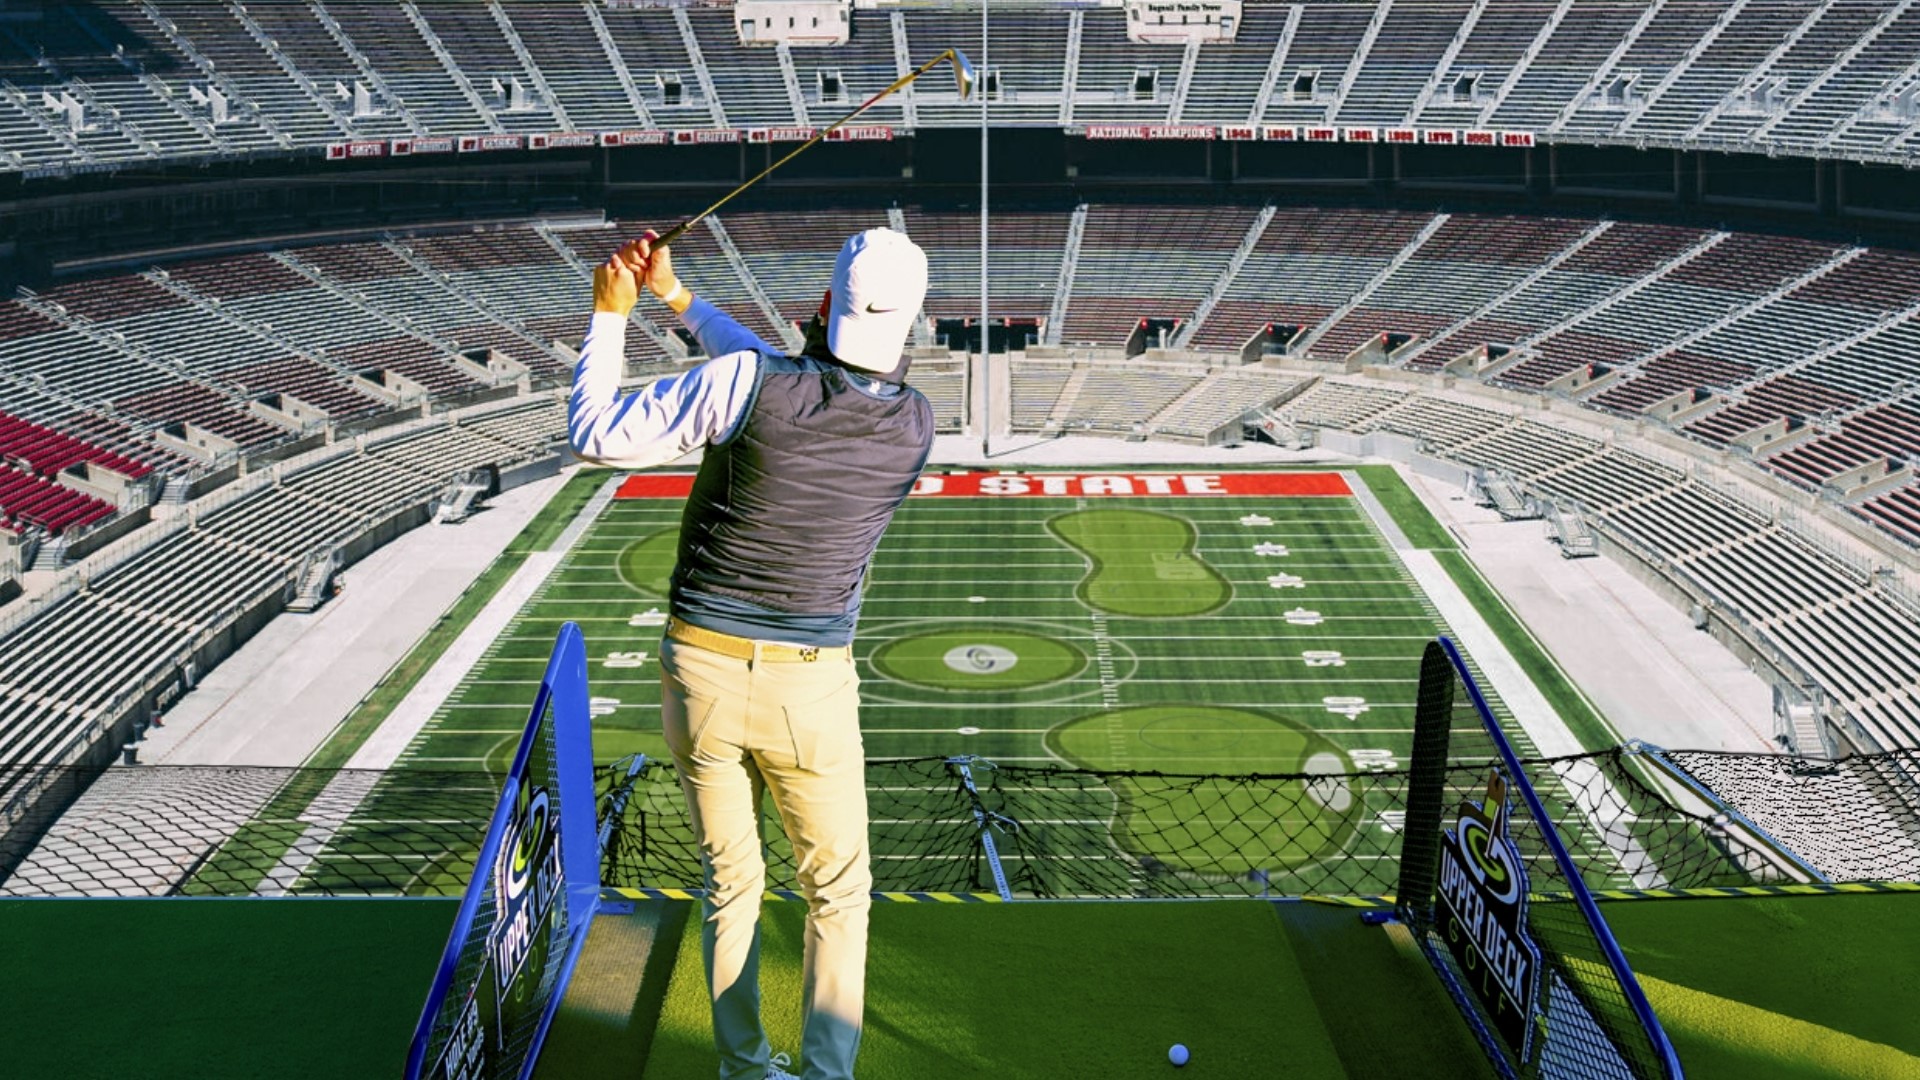 Upper Deck Golf is coming to the Shoe April 19-21.